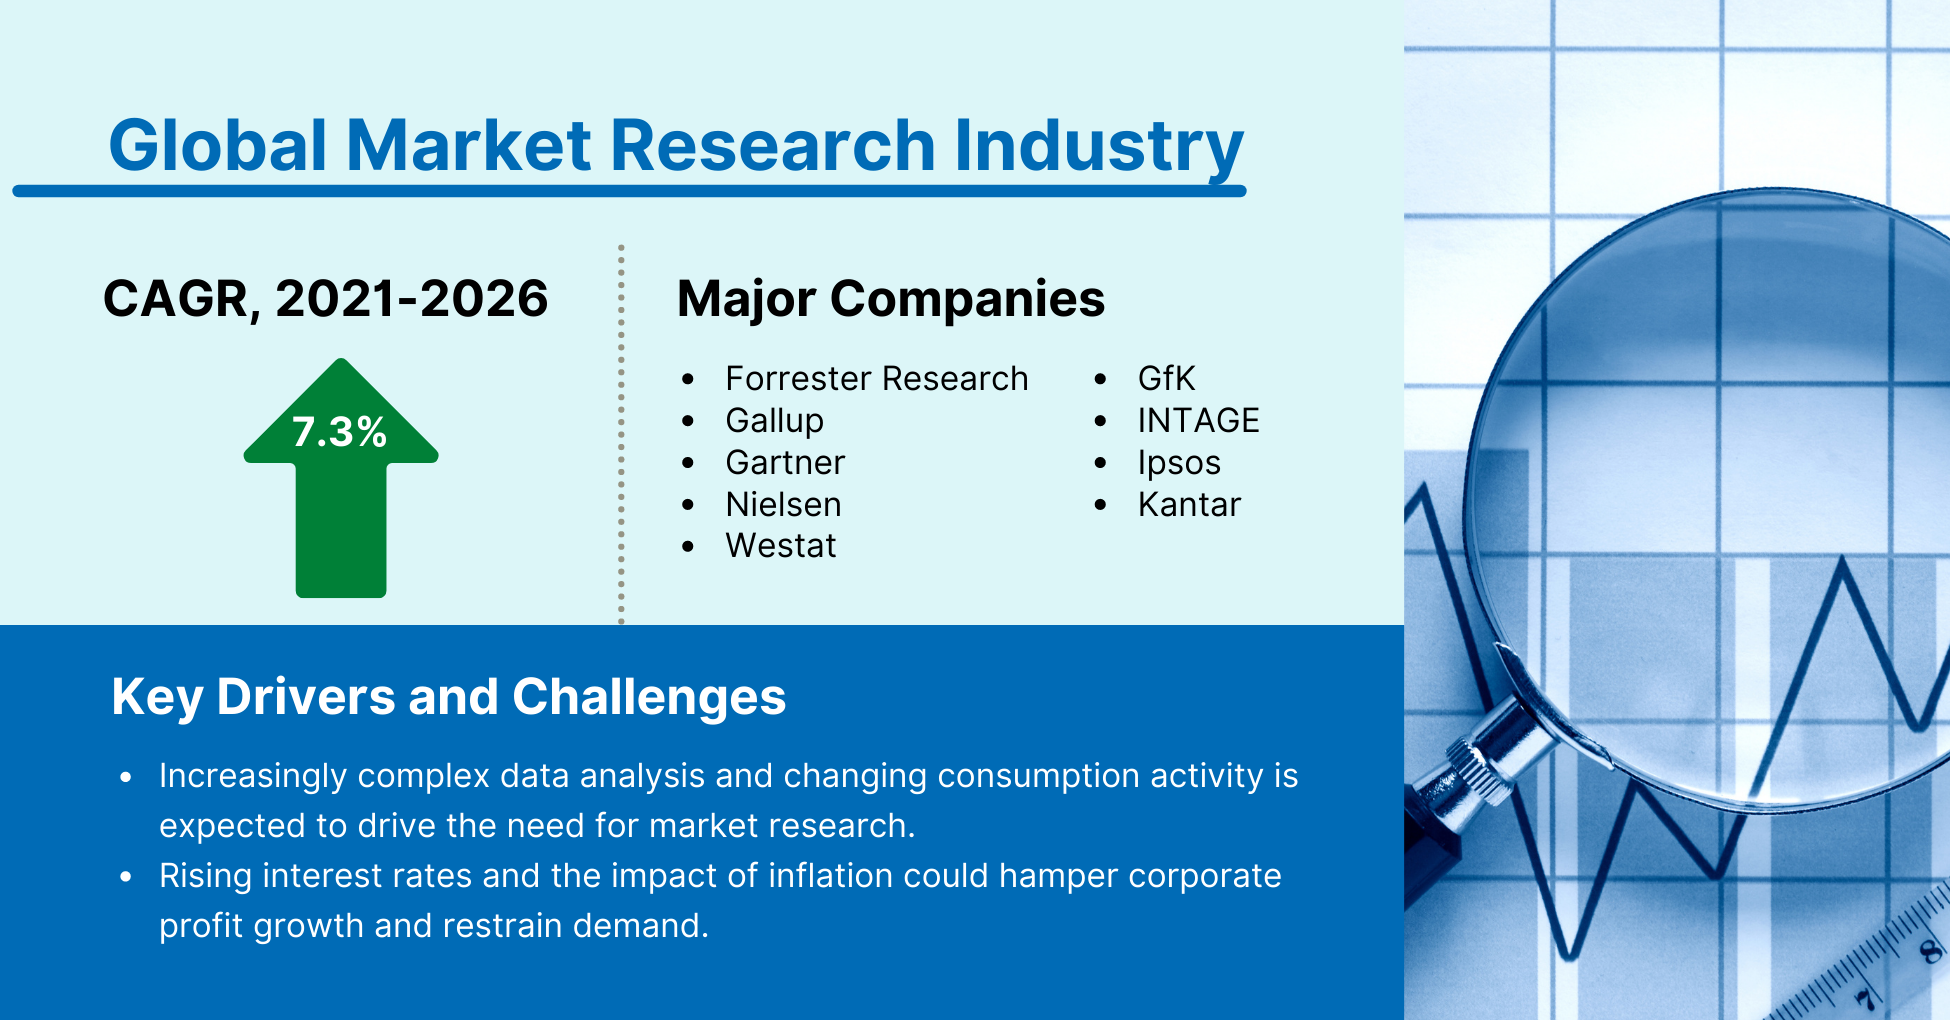 Key Facts About the Market Research Industry